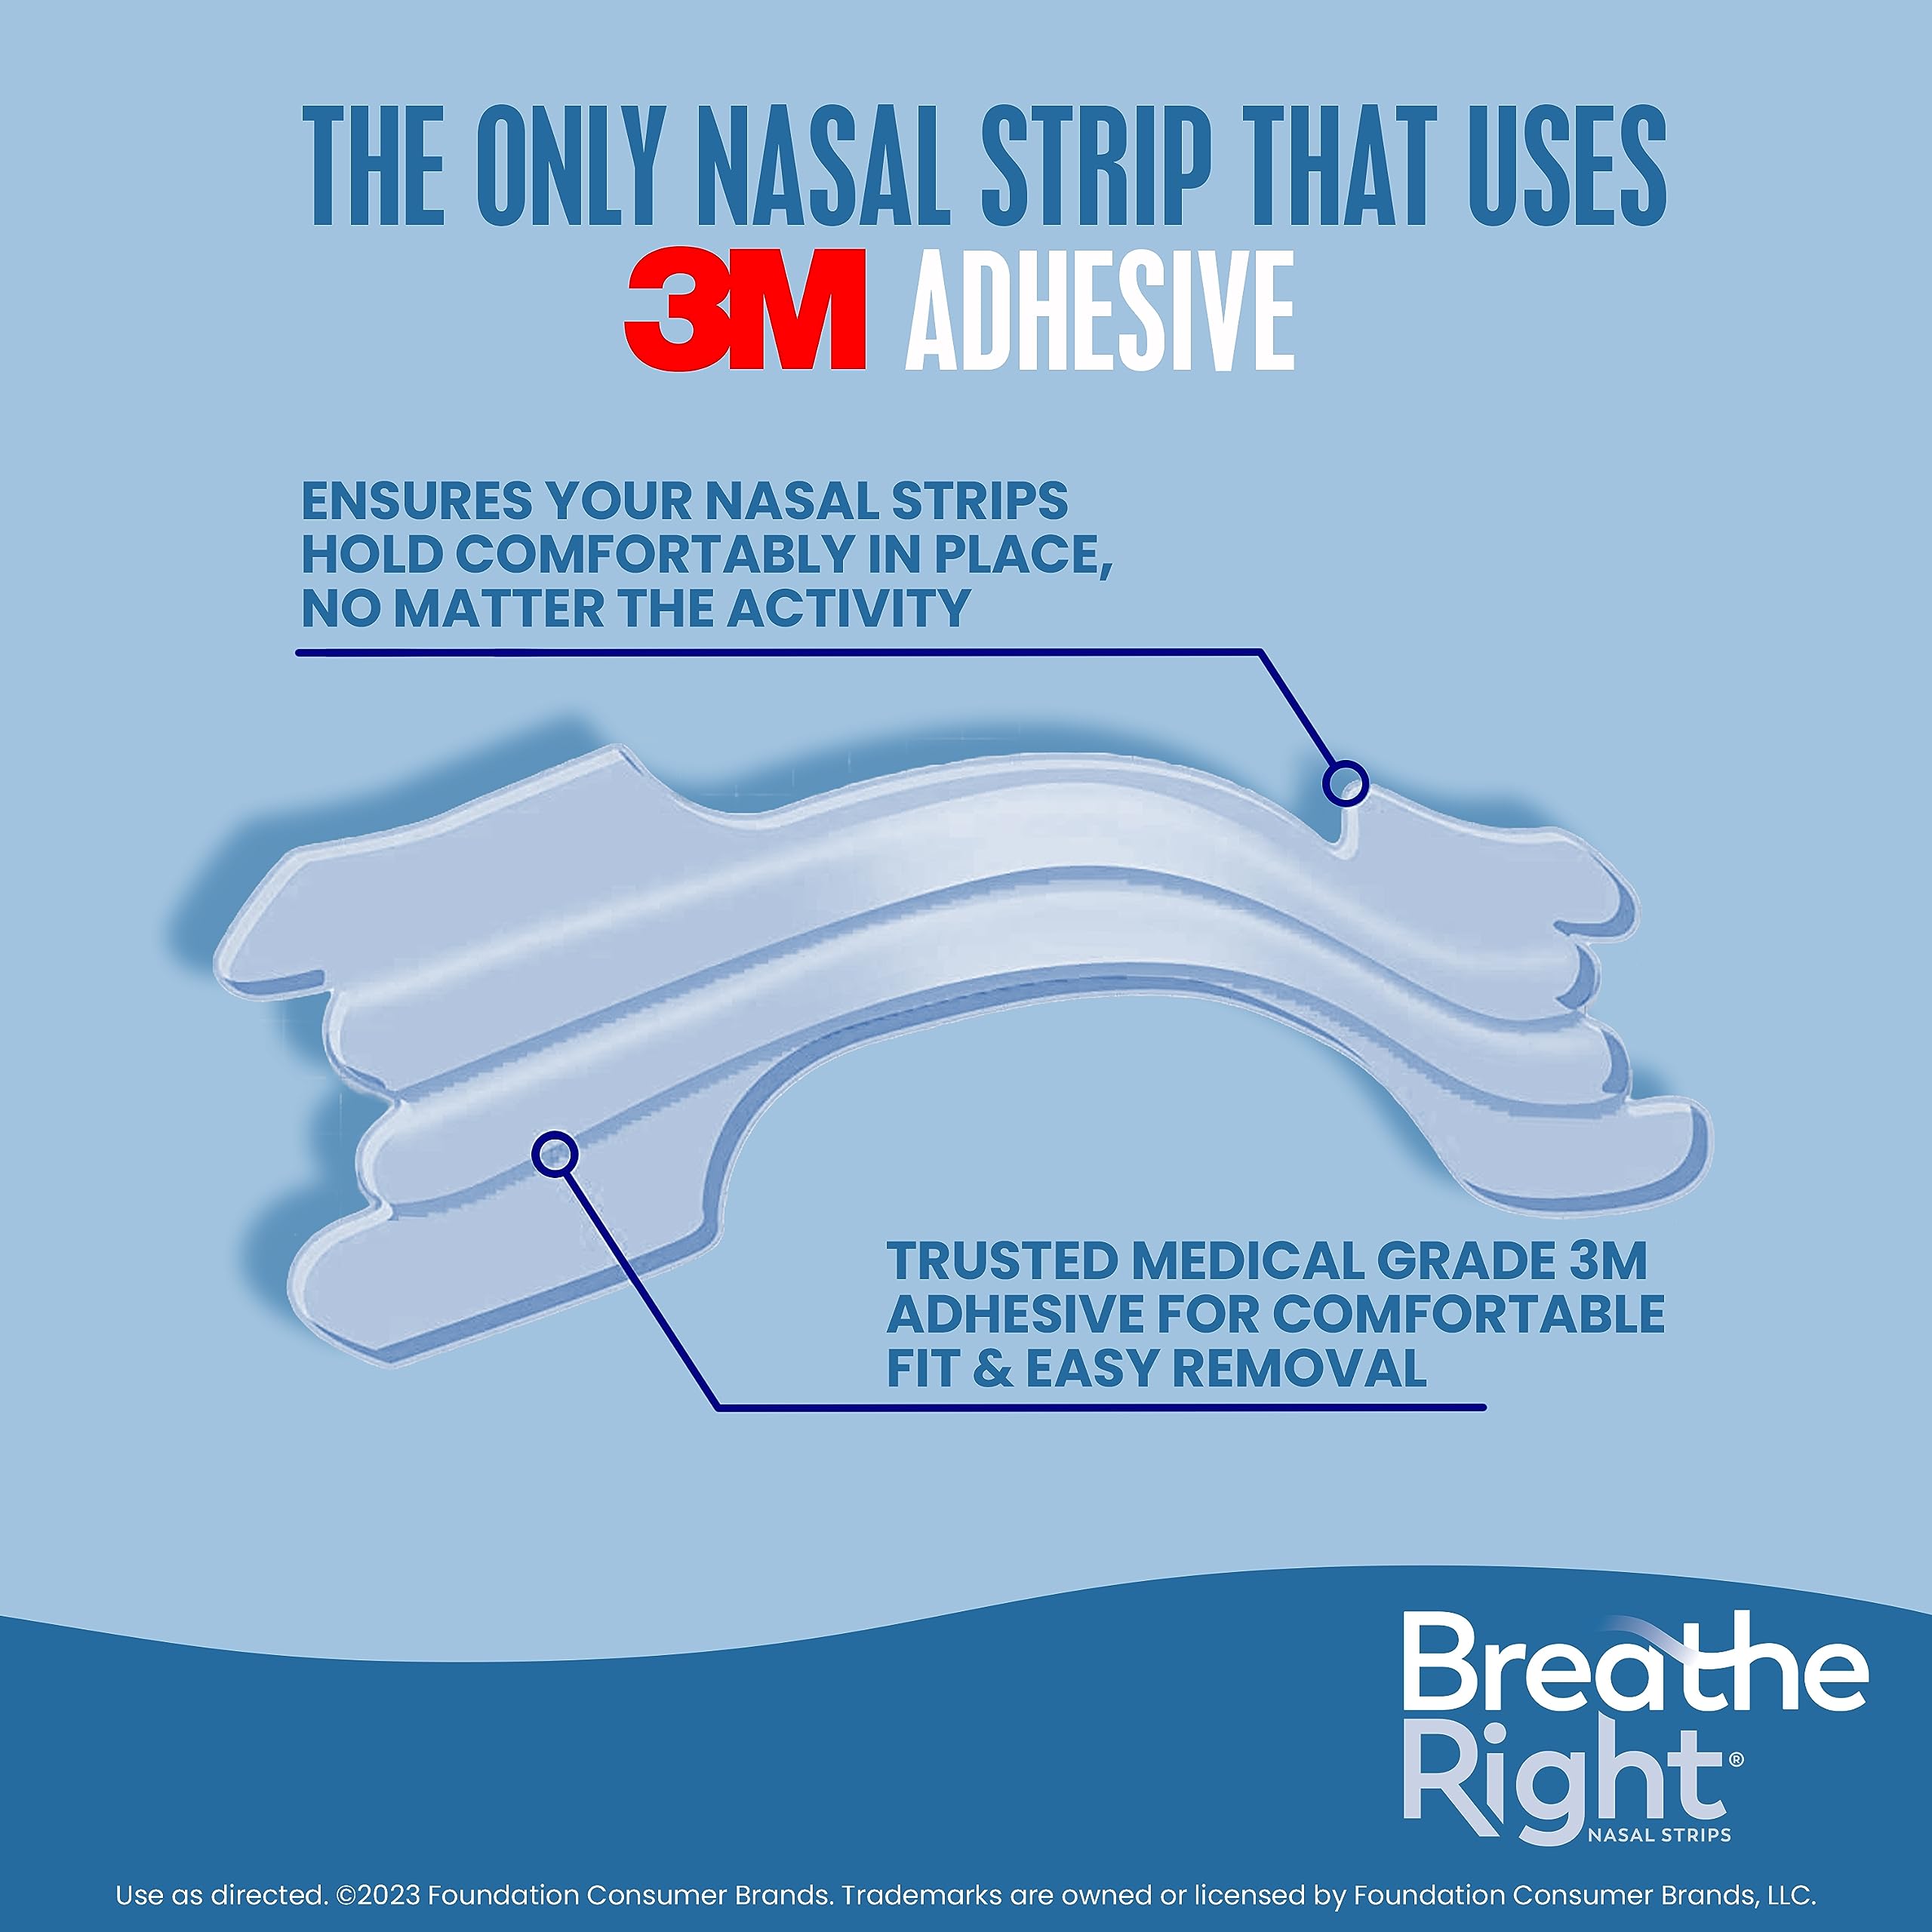 Breathe Right Original Nasal Strips | Clear Nasal Strips | Sm/Med | for Sensitive Skin | Help Stop Snoring | Drug-Free Snoring Solution & Nasal Congestion Relief Caused by Colds & Allergies | 30 ct